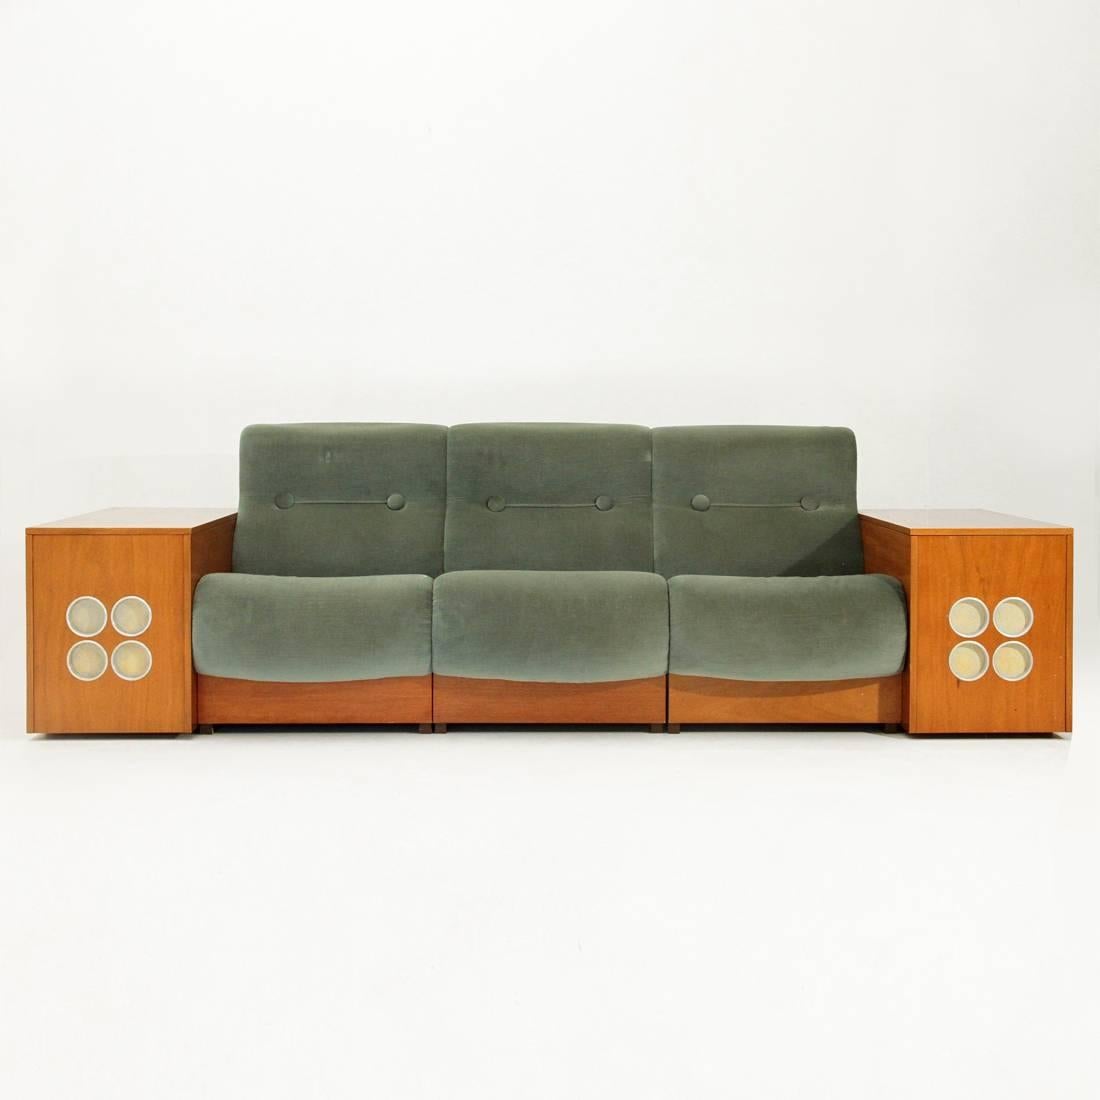 Modular design system in the 1970s.
Composed of three armchairs with wooden base and velvet upholstery, and two wooden cubes openable, one holds a bottle compartment, the other a turntable, both have fronts with acoustics.


Dimensions: Width